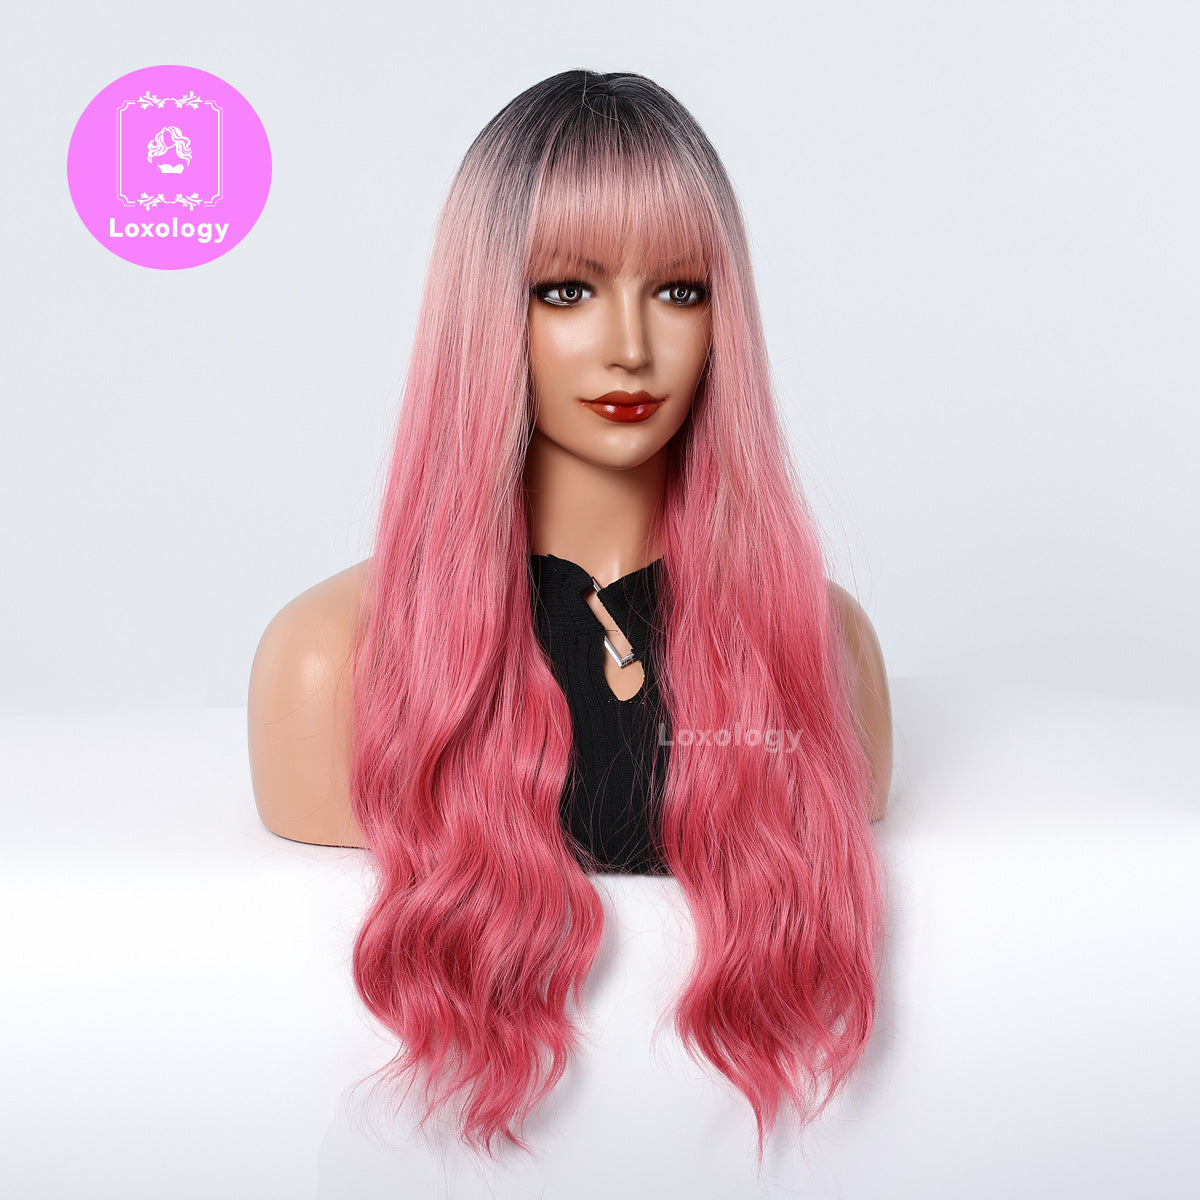 【Rowan】Loxology | 26 Inch Curly Pink Wigs with Bangs and Black Roots Synthetic Wigs